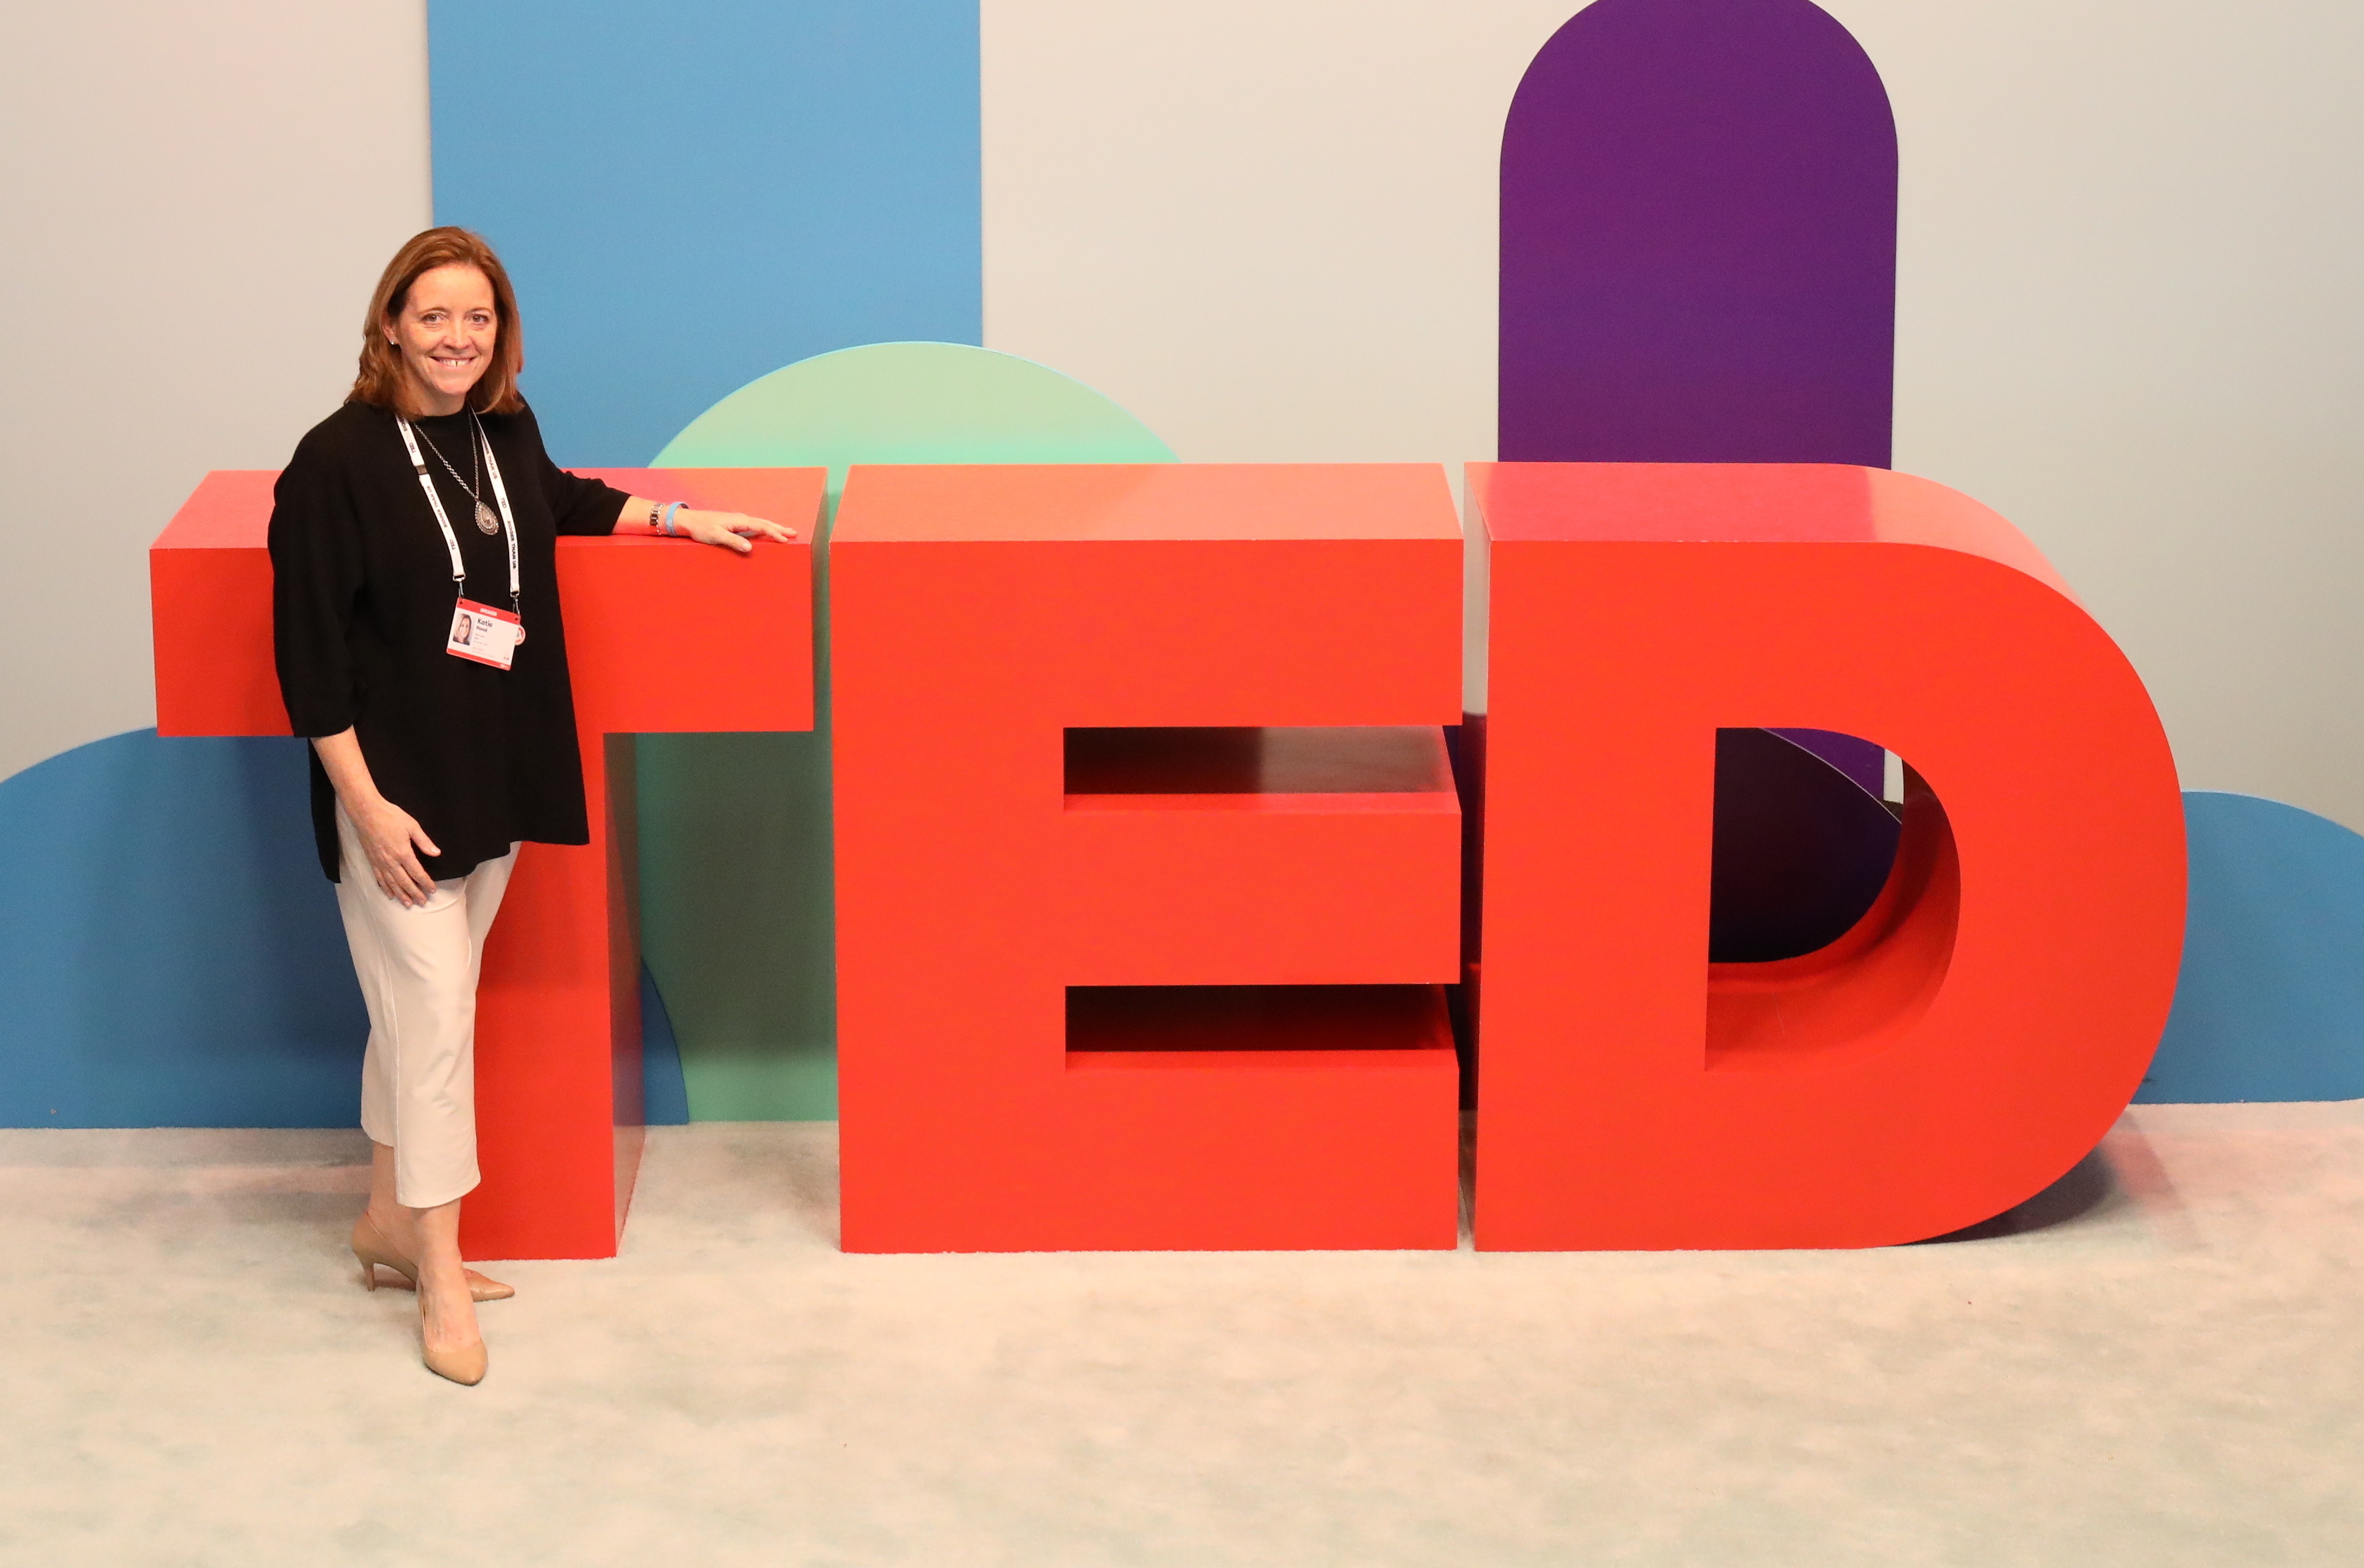 8 Things I Learned from Katie Hood’s TED Talk